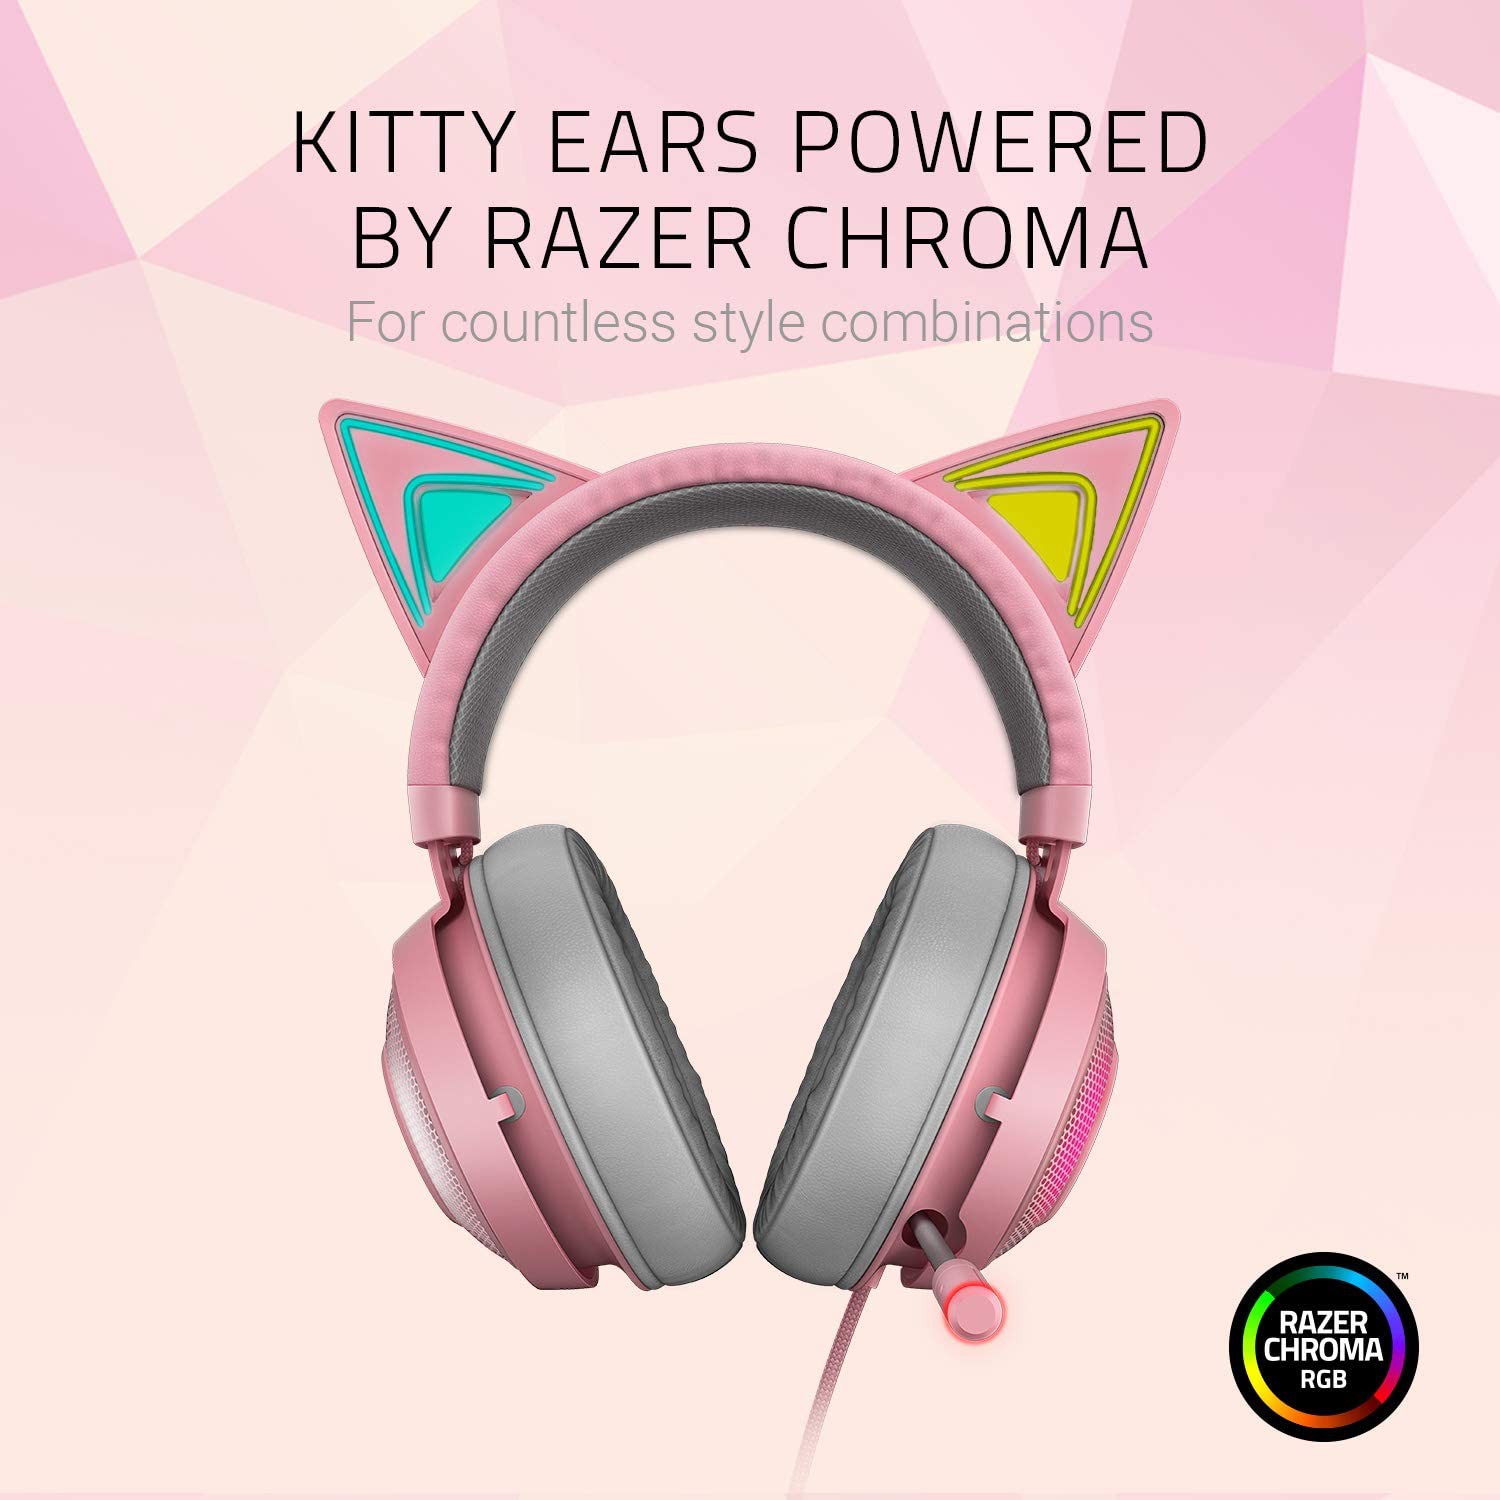 This Top Gamer Girl Headset Has Adorable Pink Kitty Ears | Work + 